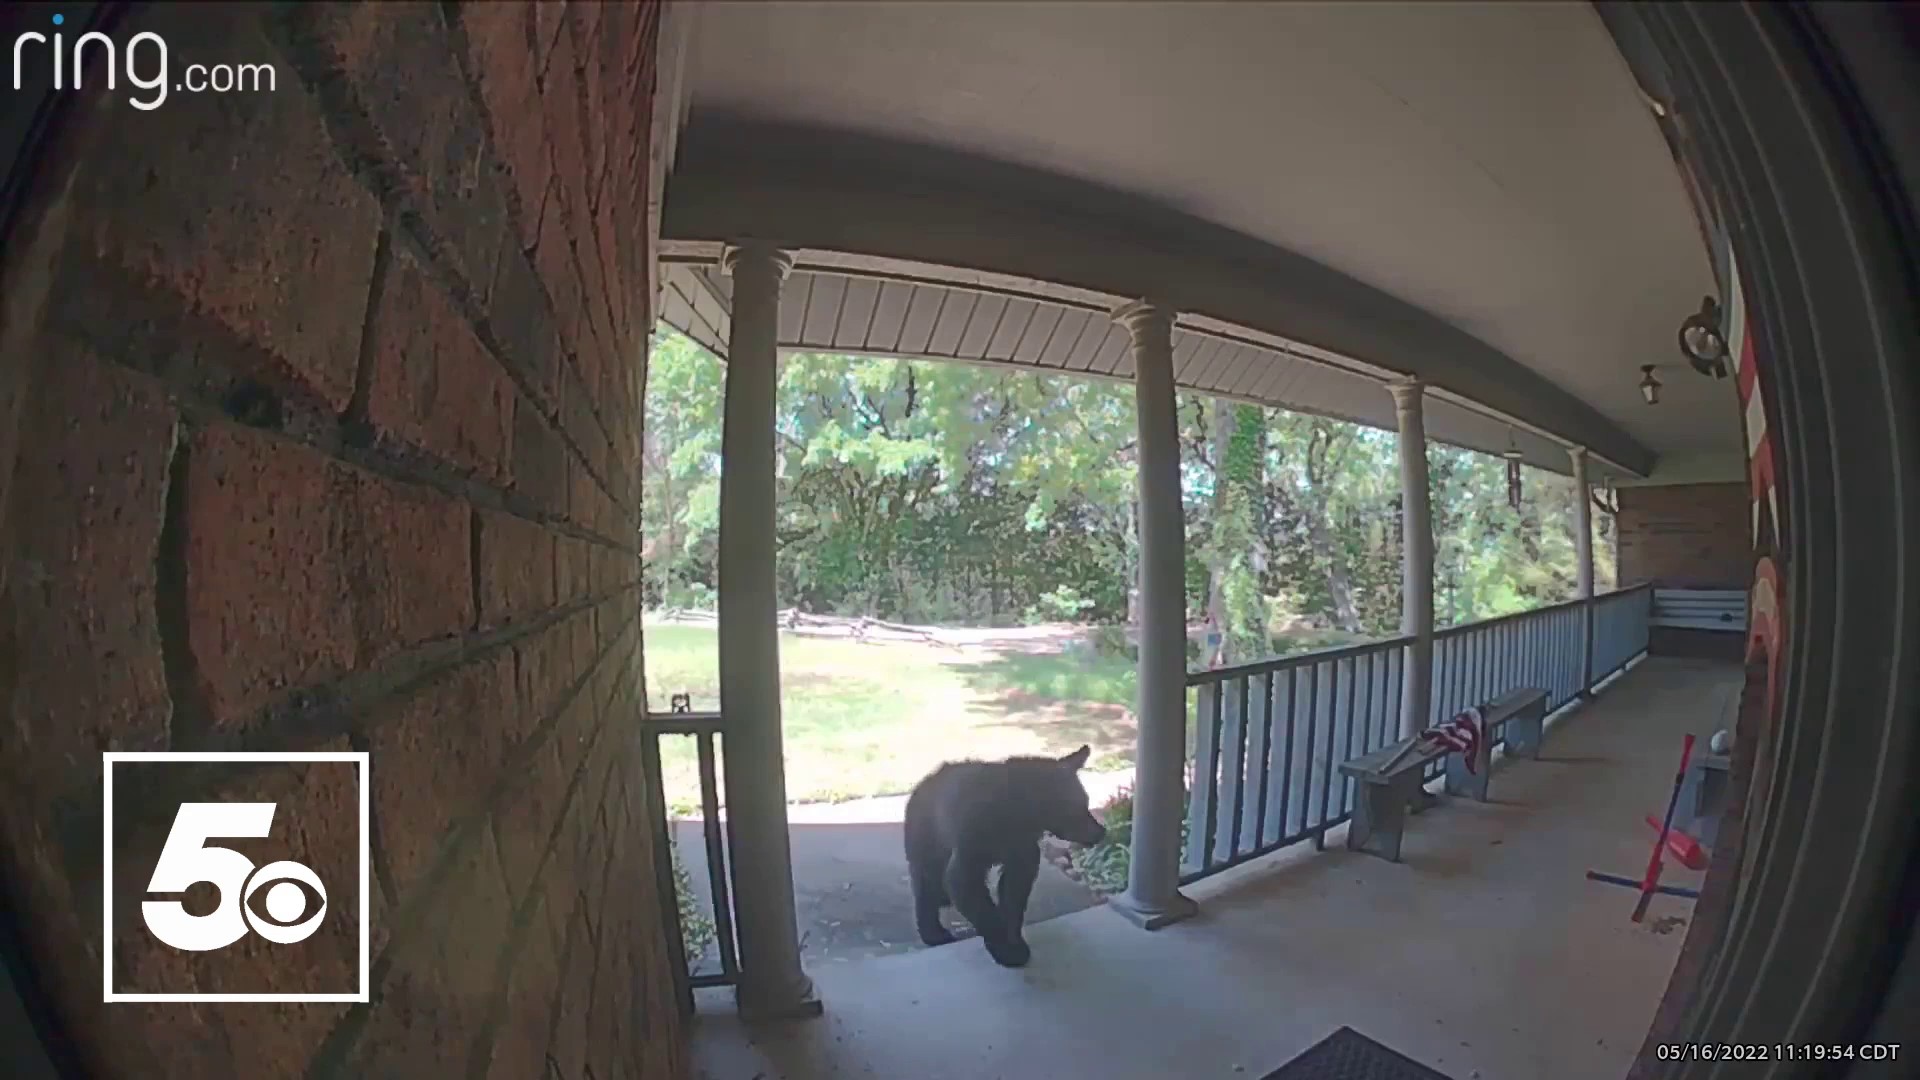 A Fort Smith homeowner captured the moment an apparent black bear stopped by their home.